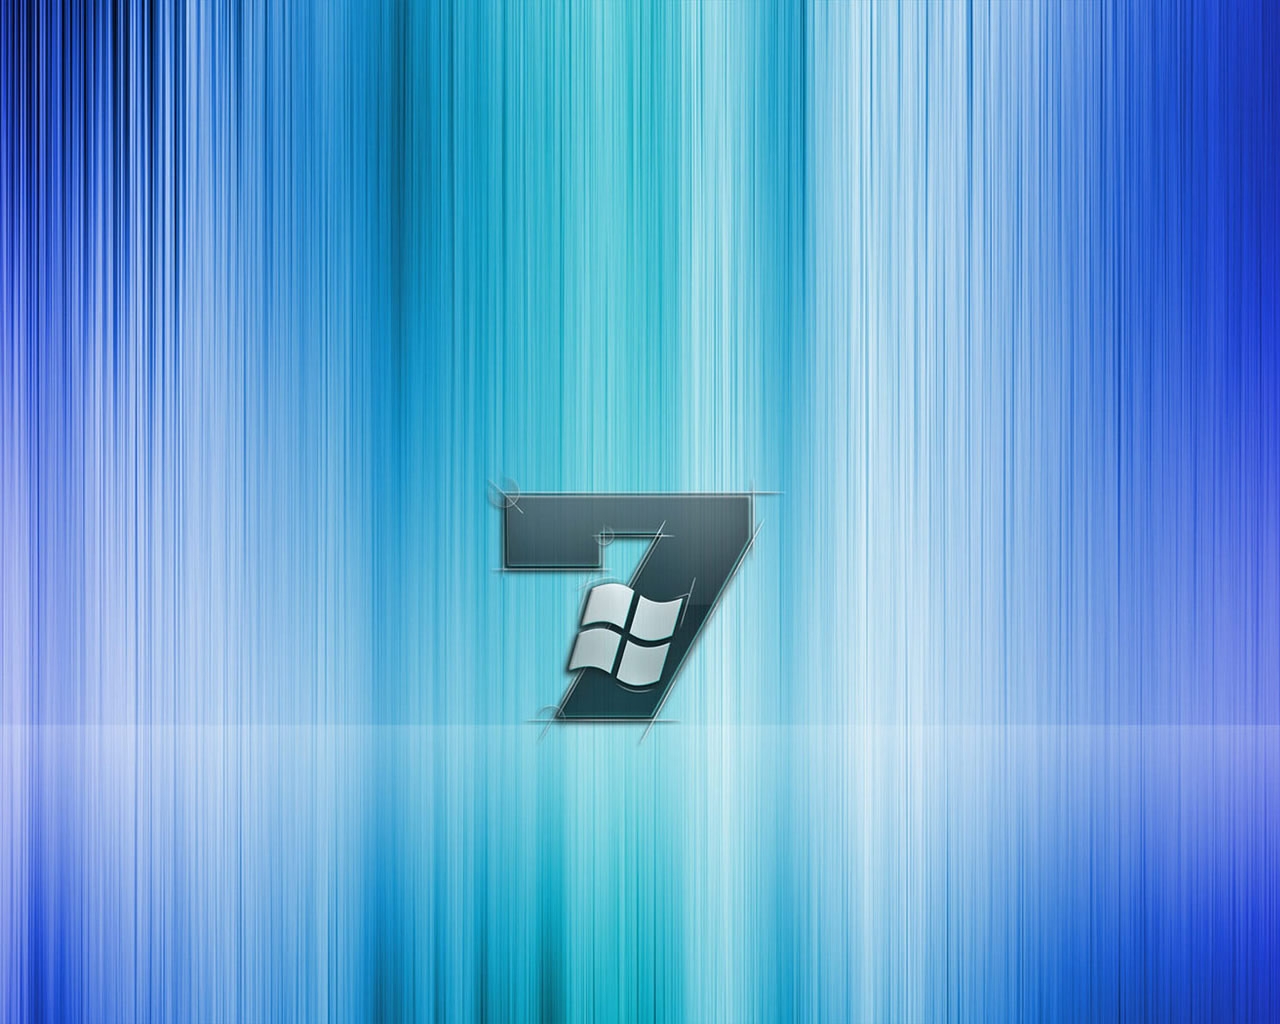 Stylized Windows Seven for 1280 x 1024 resolution